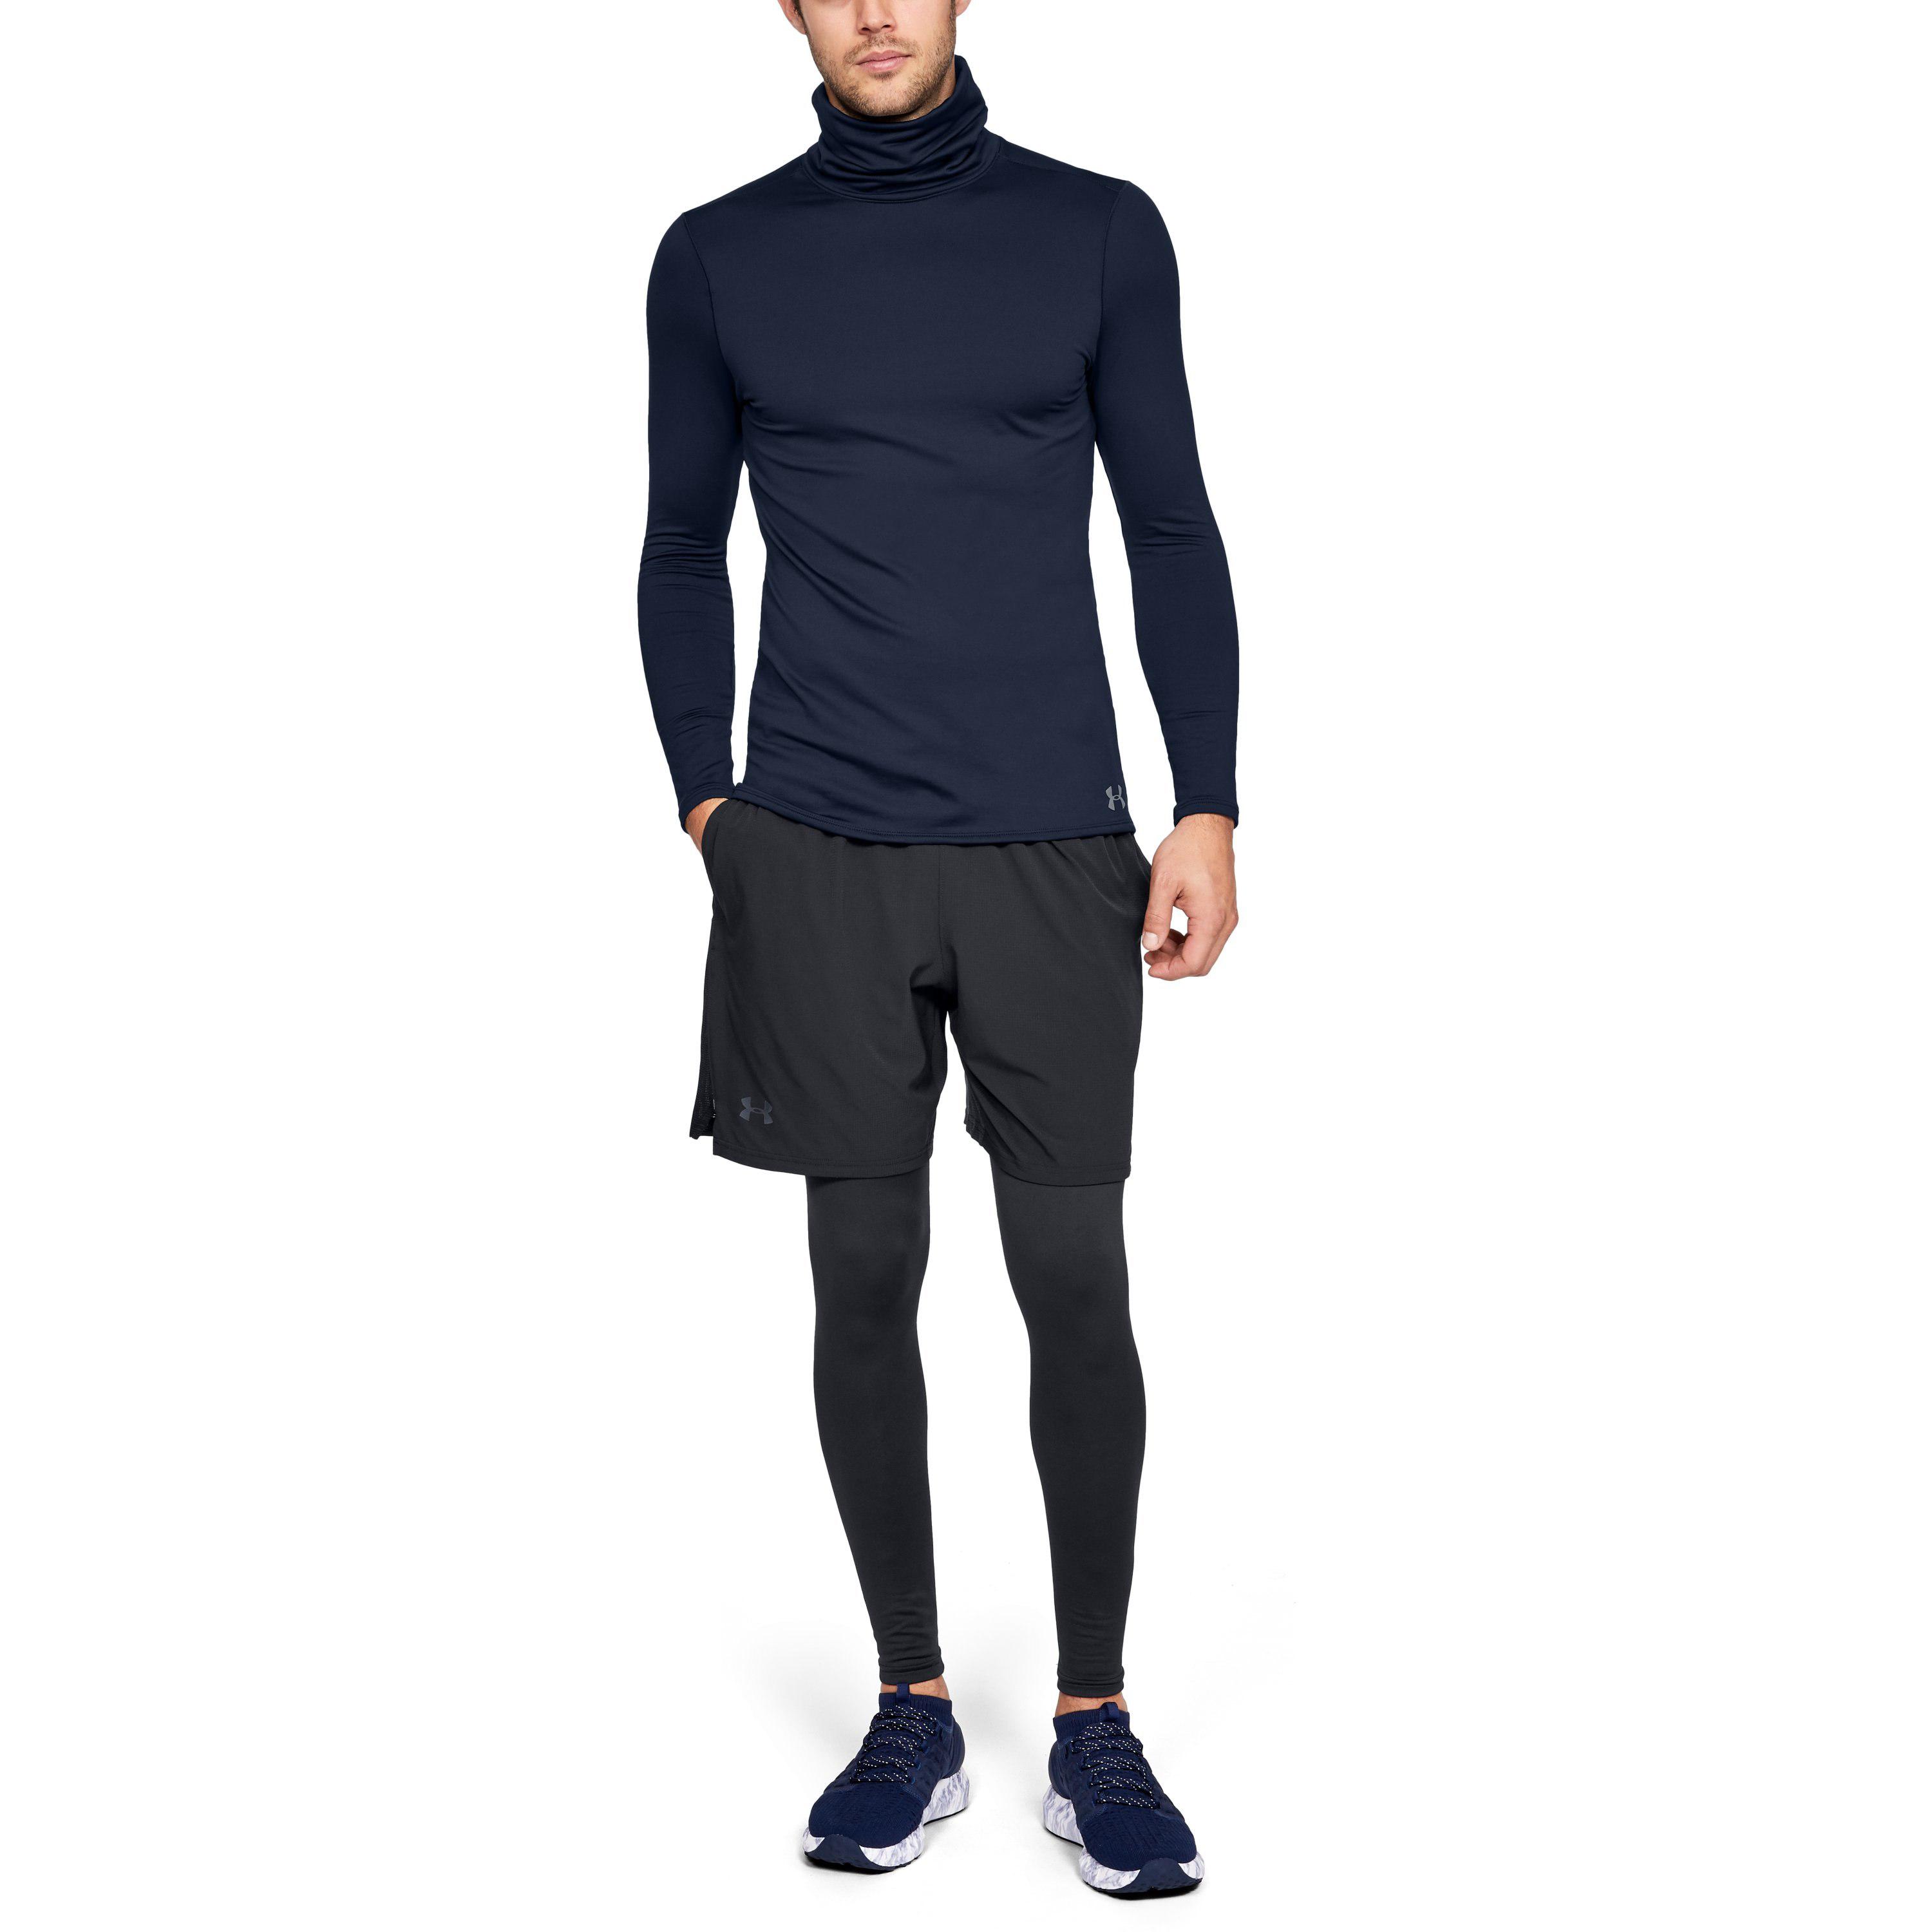 under armour coldgear fitted funnel neck